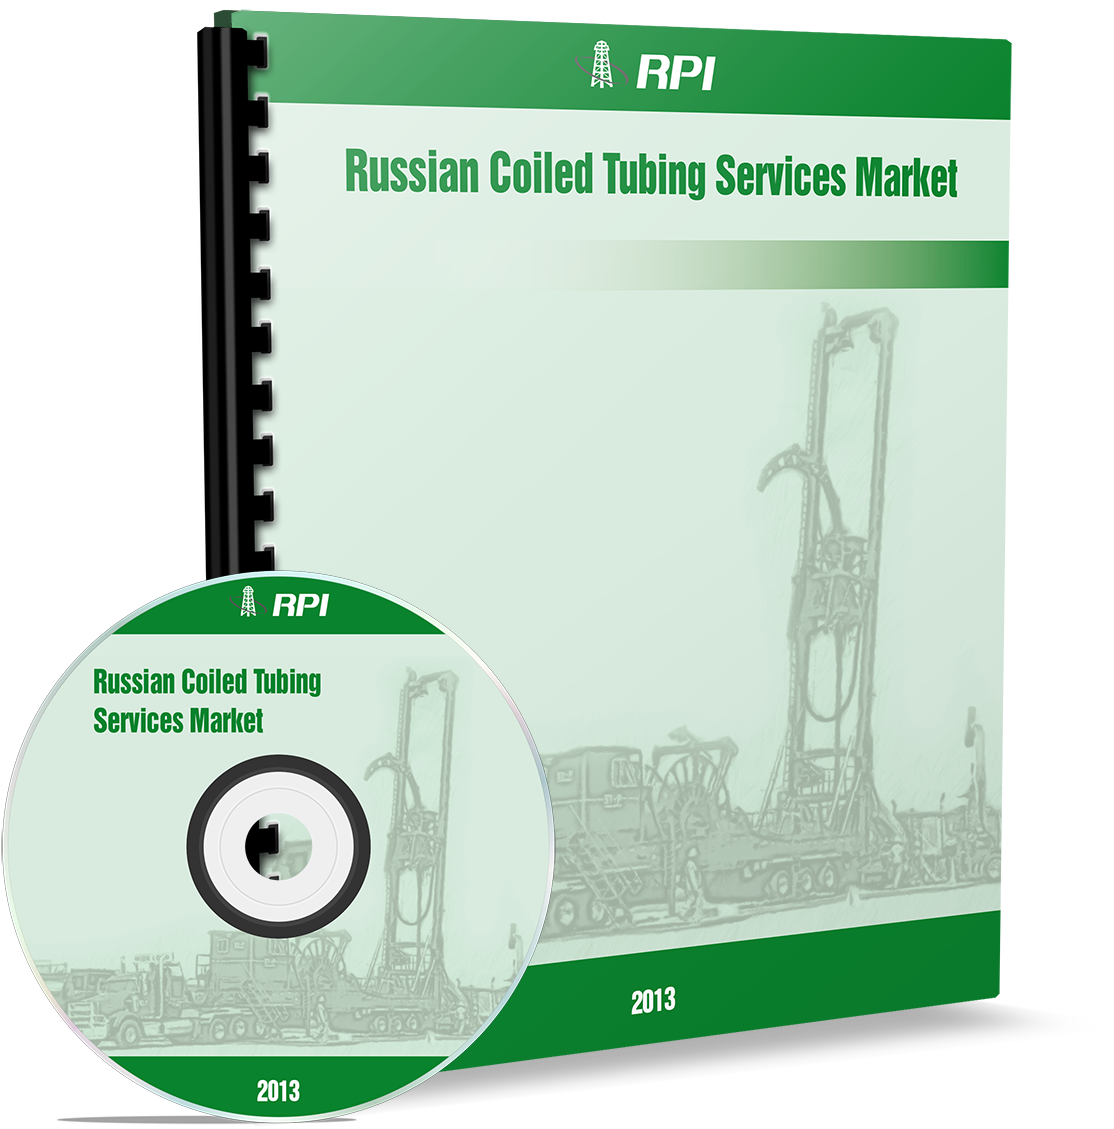 Russian Coiled Tubing Services Market 2013